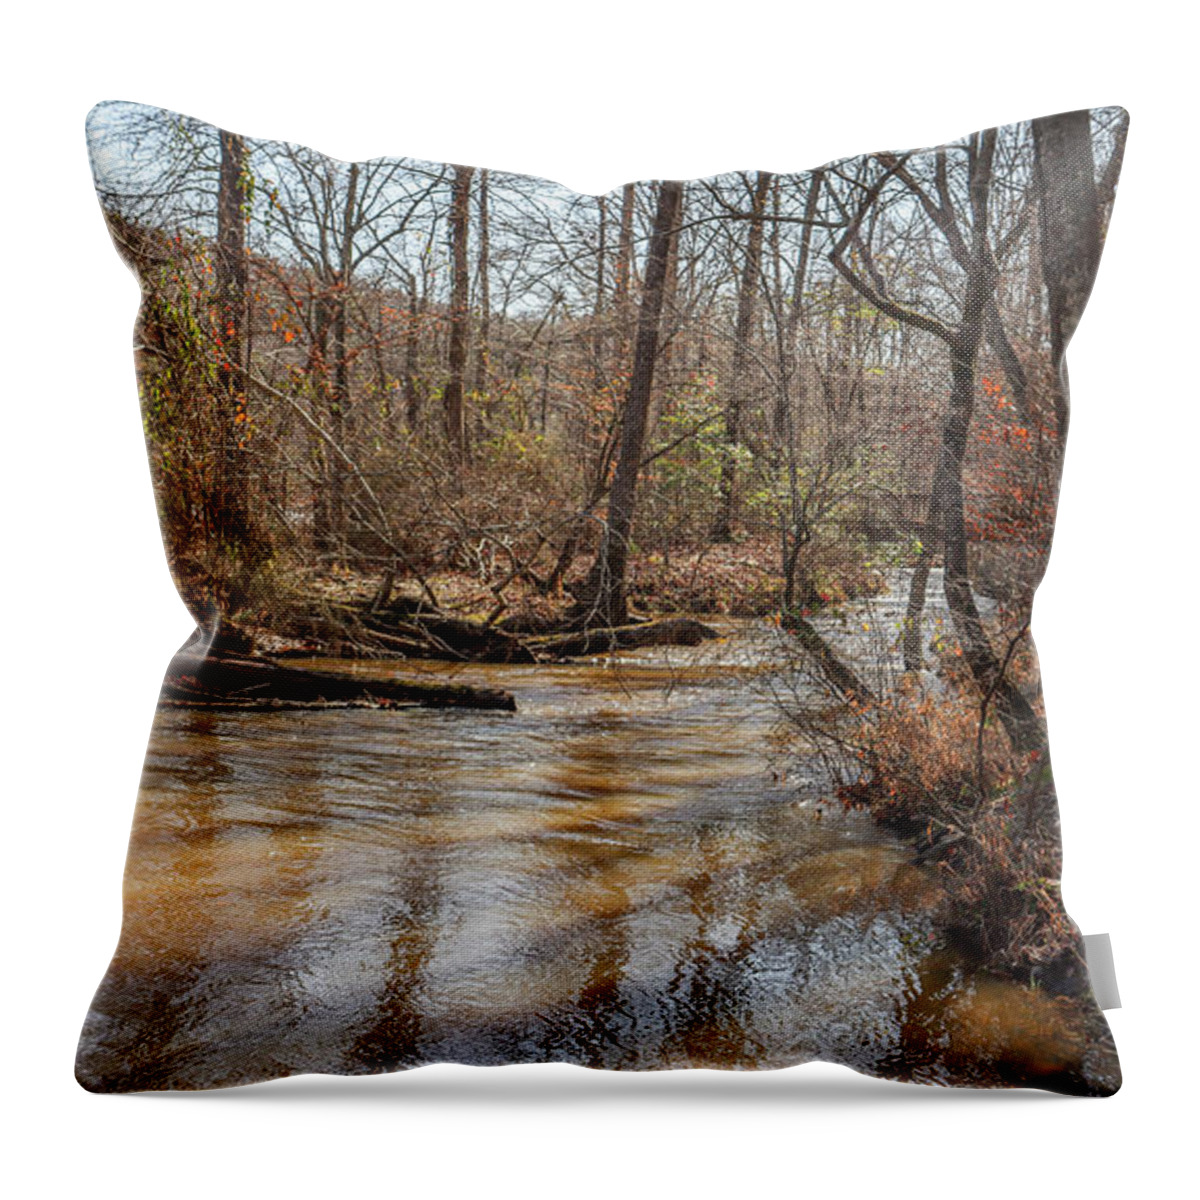 Sweetwater Creek Throw Pillow featuring the photograph A Sweetwater Creek Wind by Ed Williams